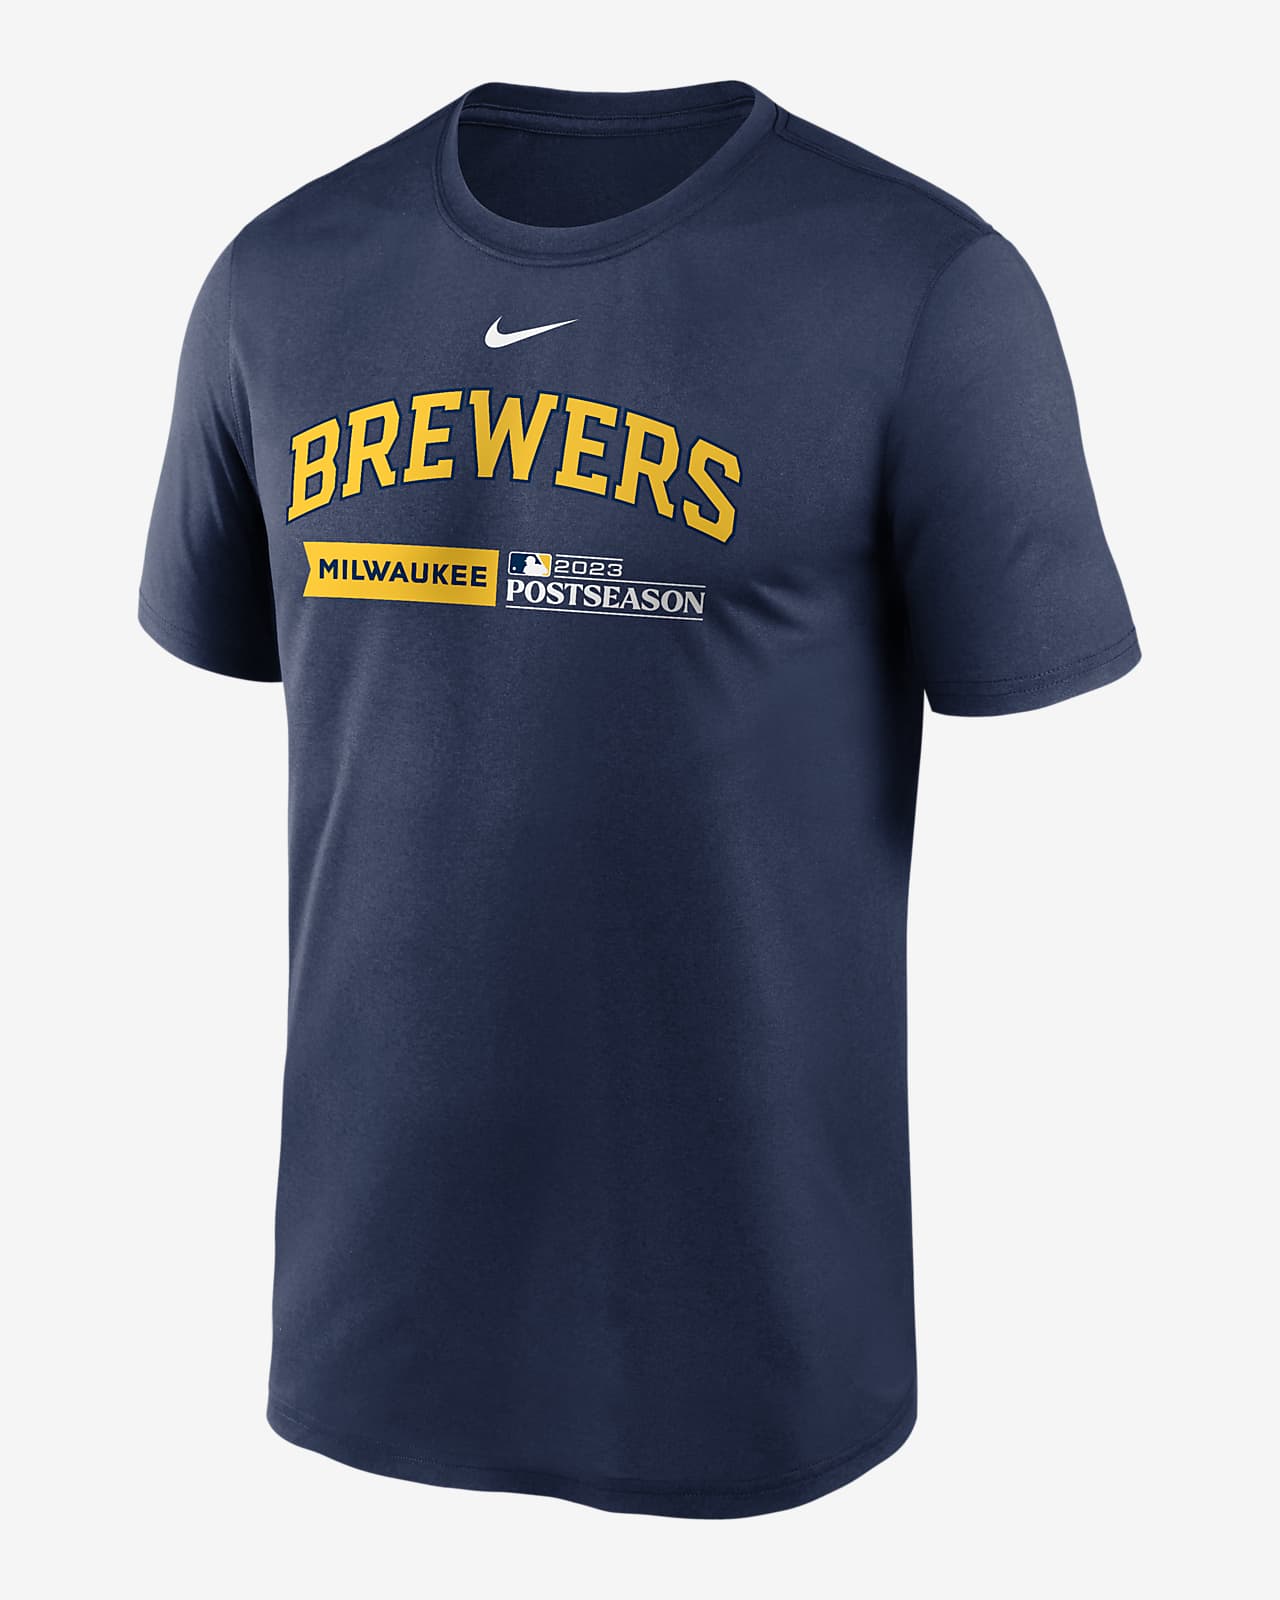 Get your postseason gear: Brewers Team Store extending hours; new